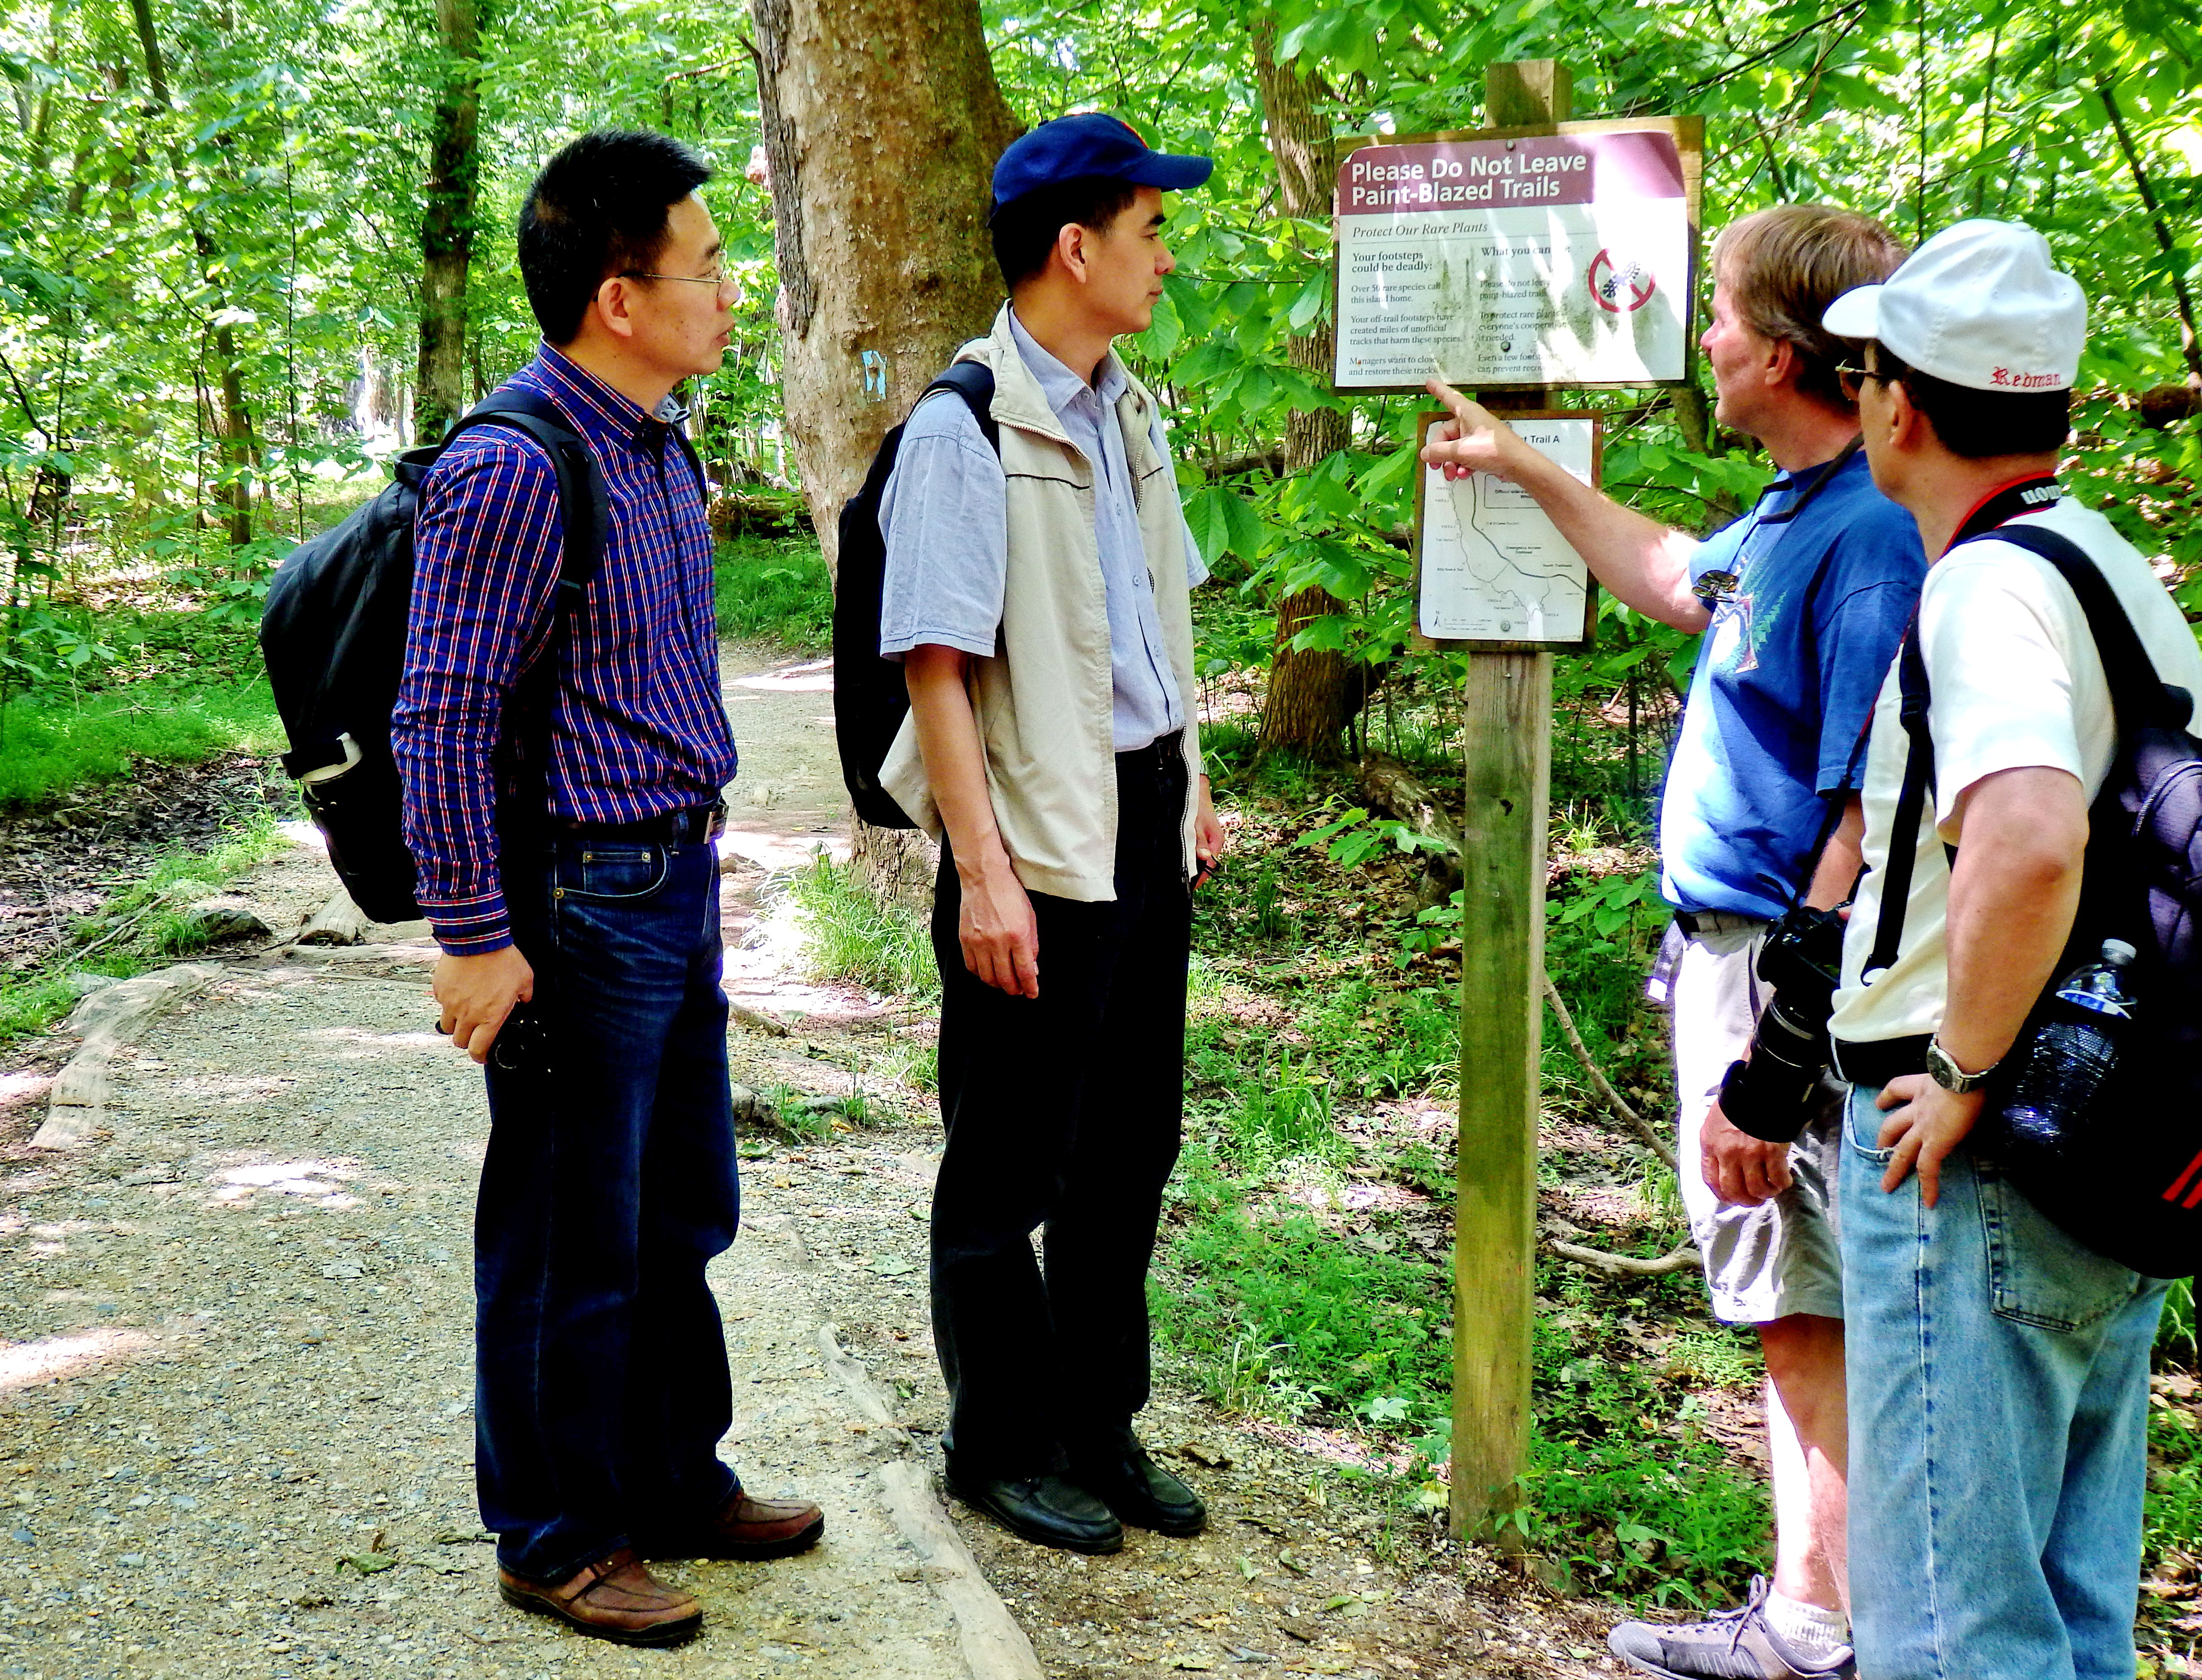 Four people looking at a trail sign in the forest